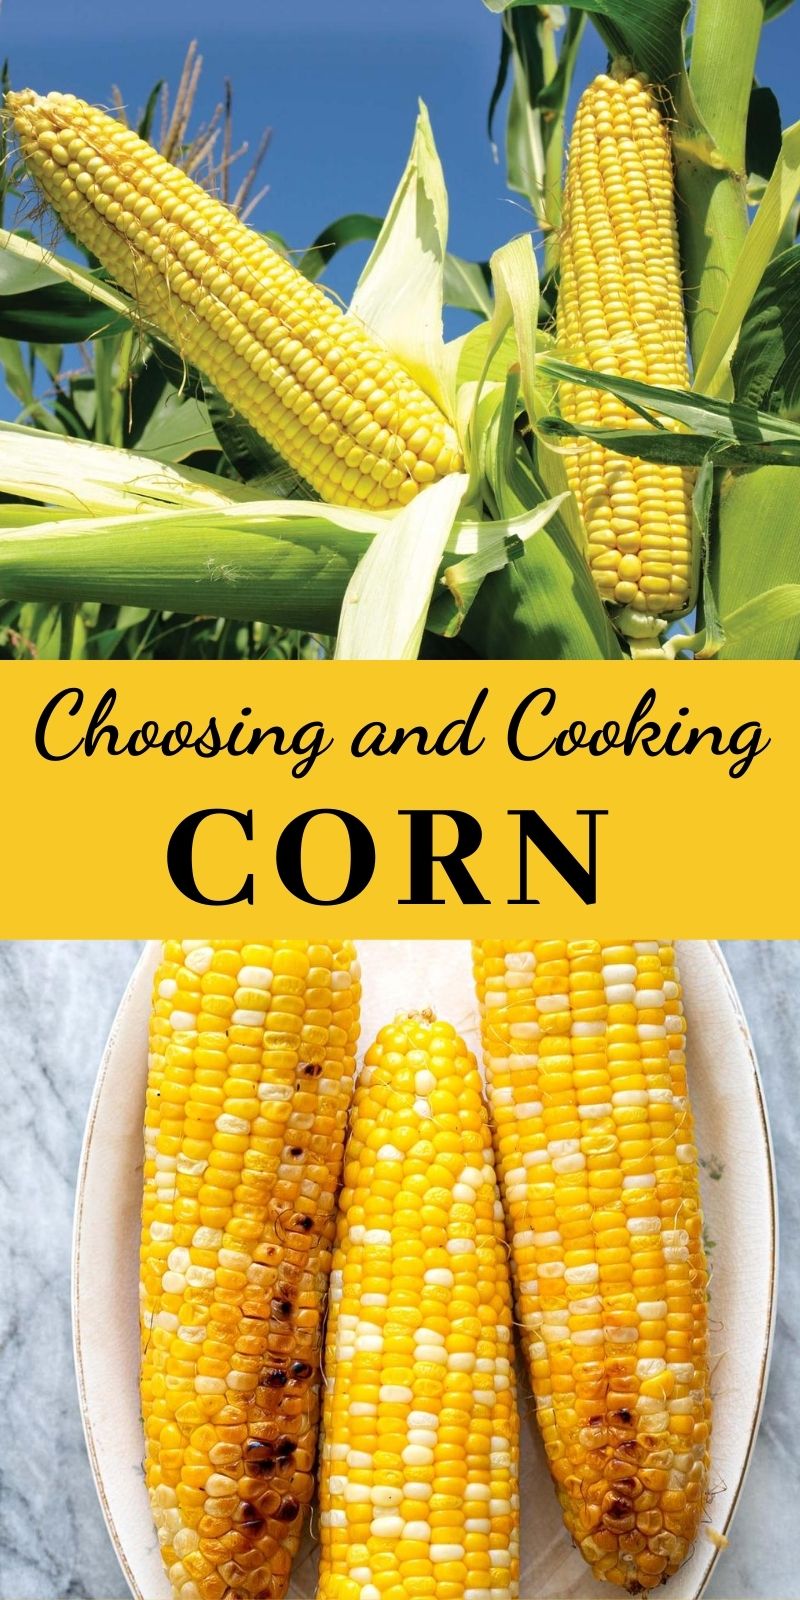 Choosing and Cooking Corn